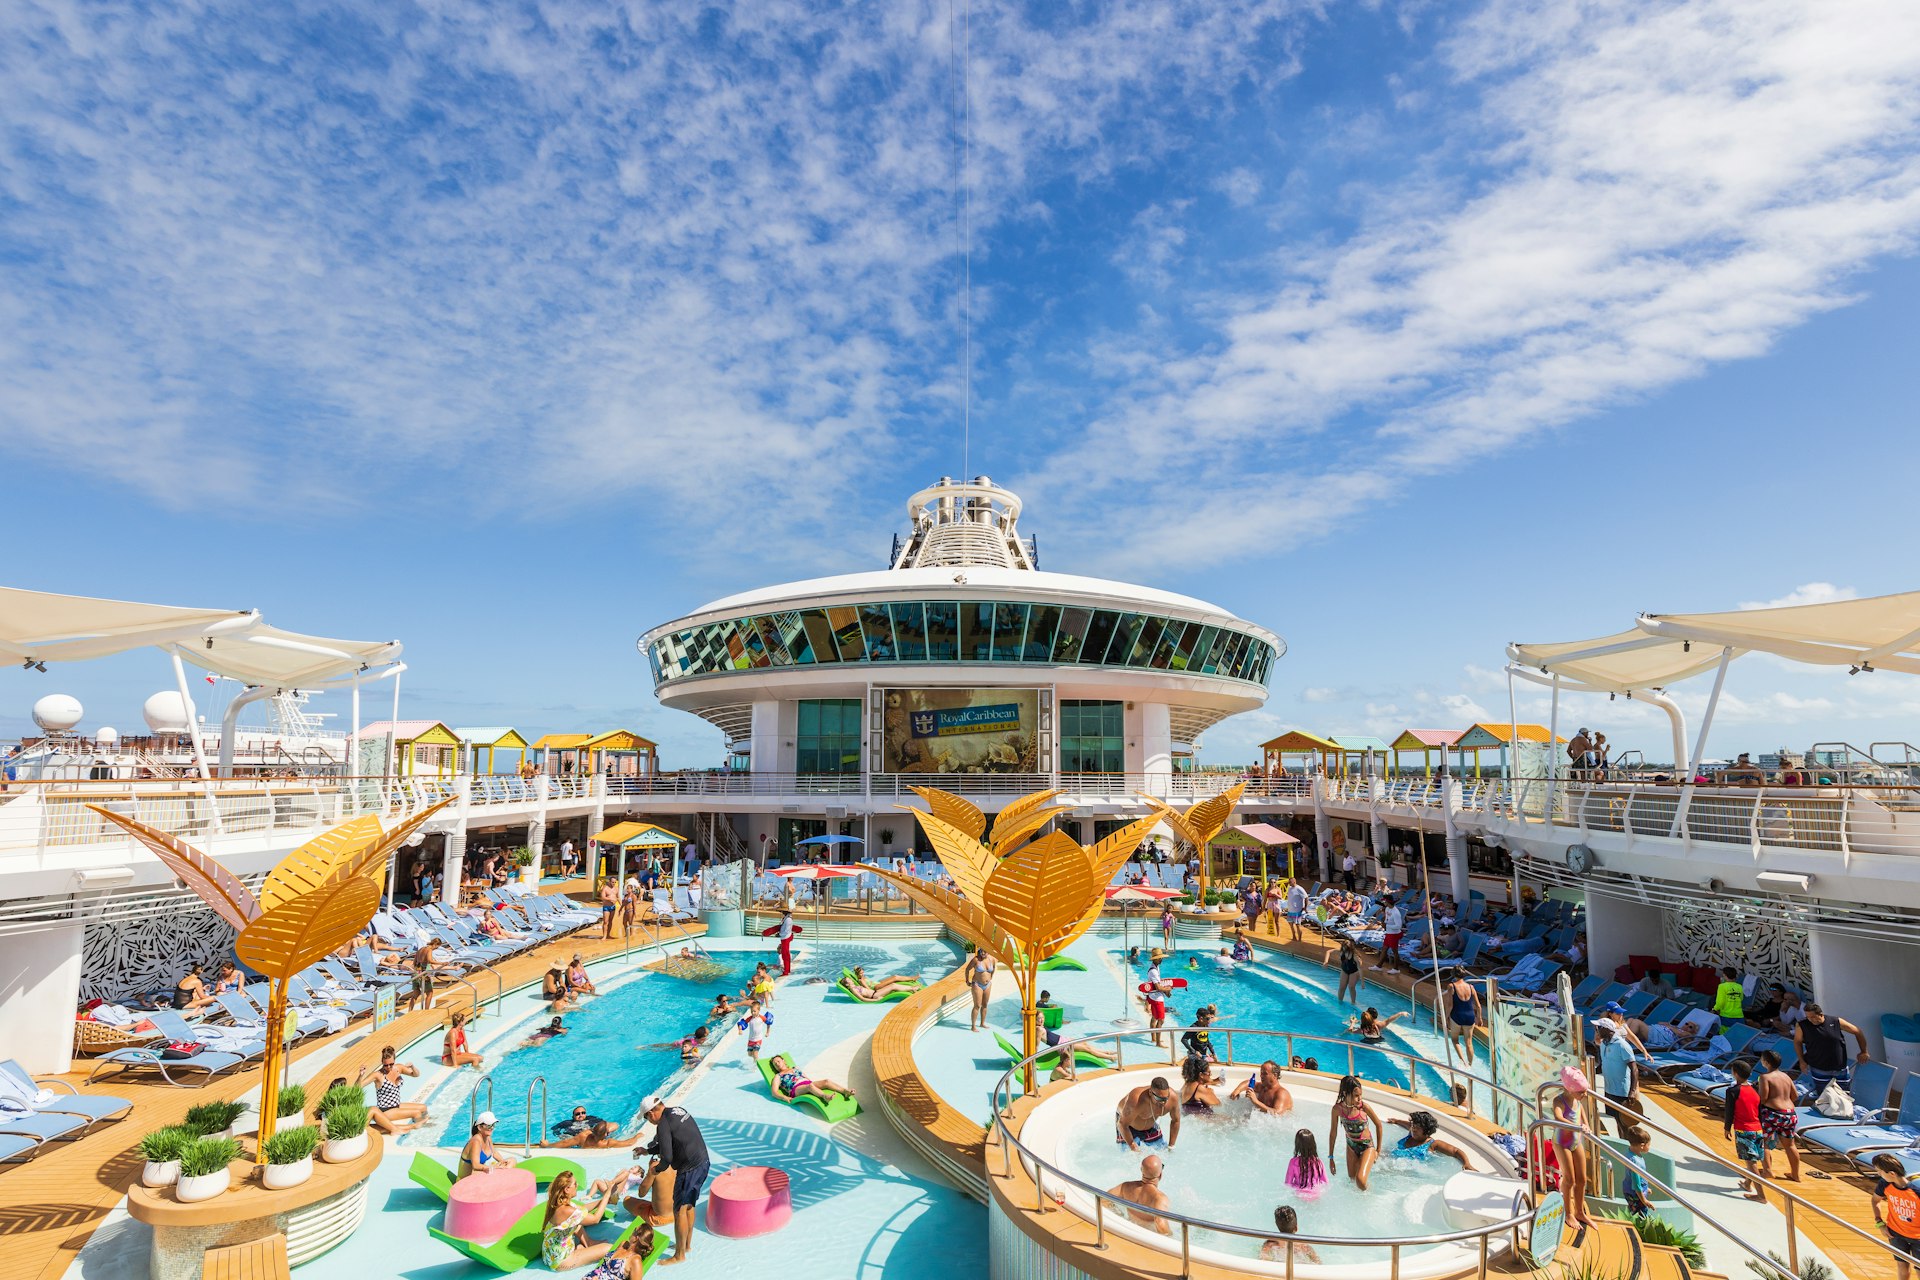 The top of a Royal Caribbean cruise ship with a balcony looking down over a pool with people and lounge chairs.;